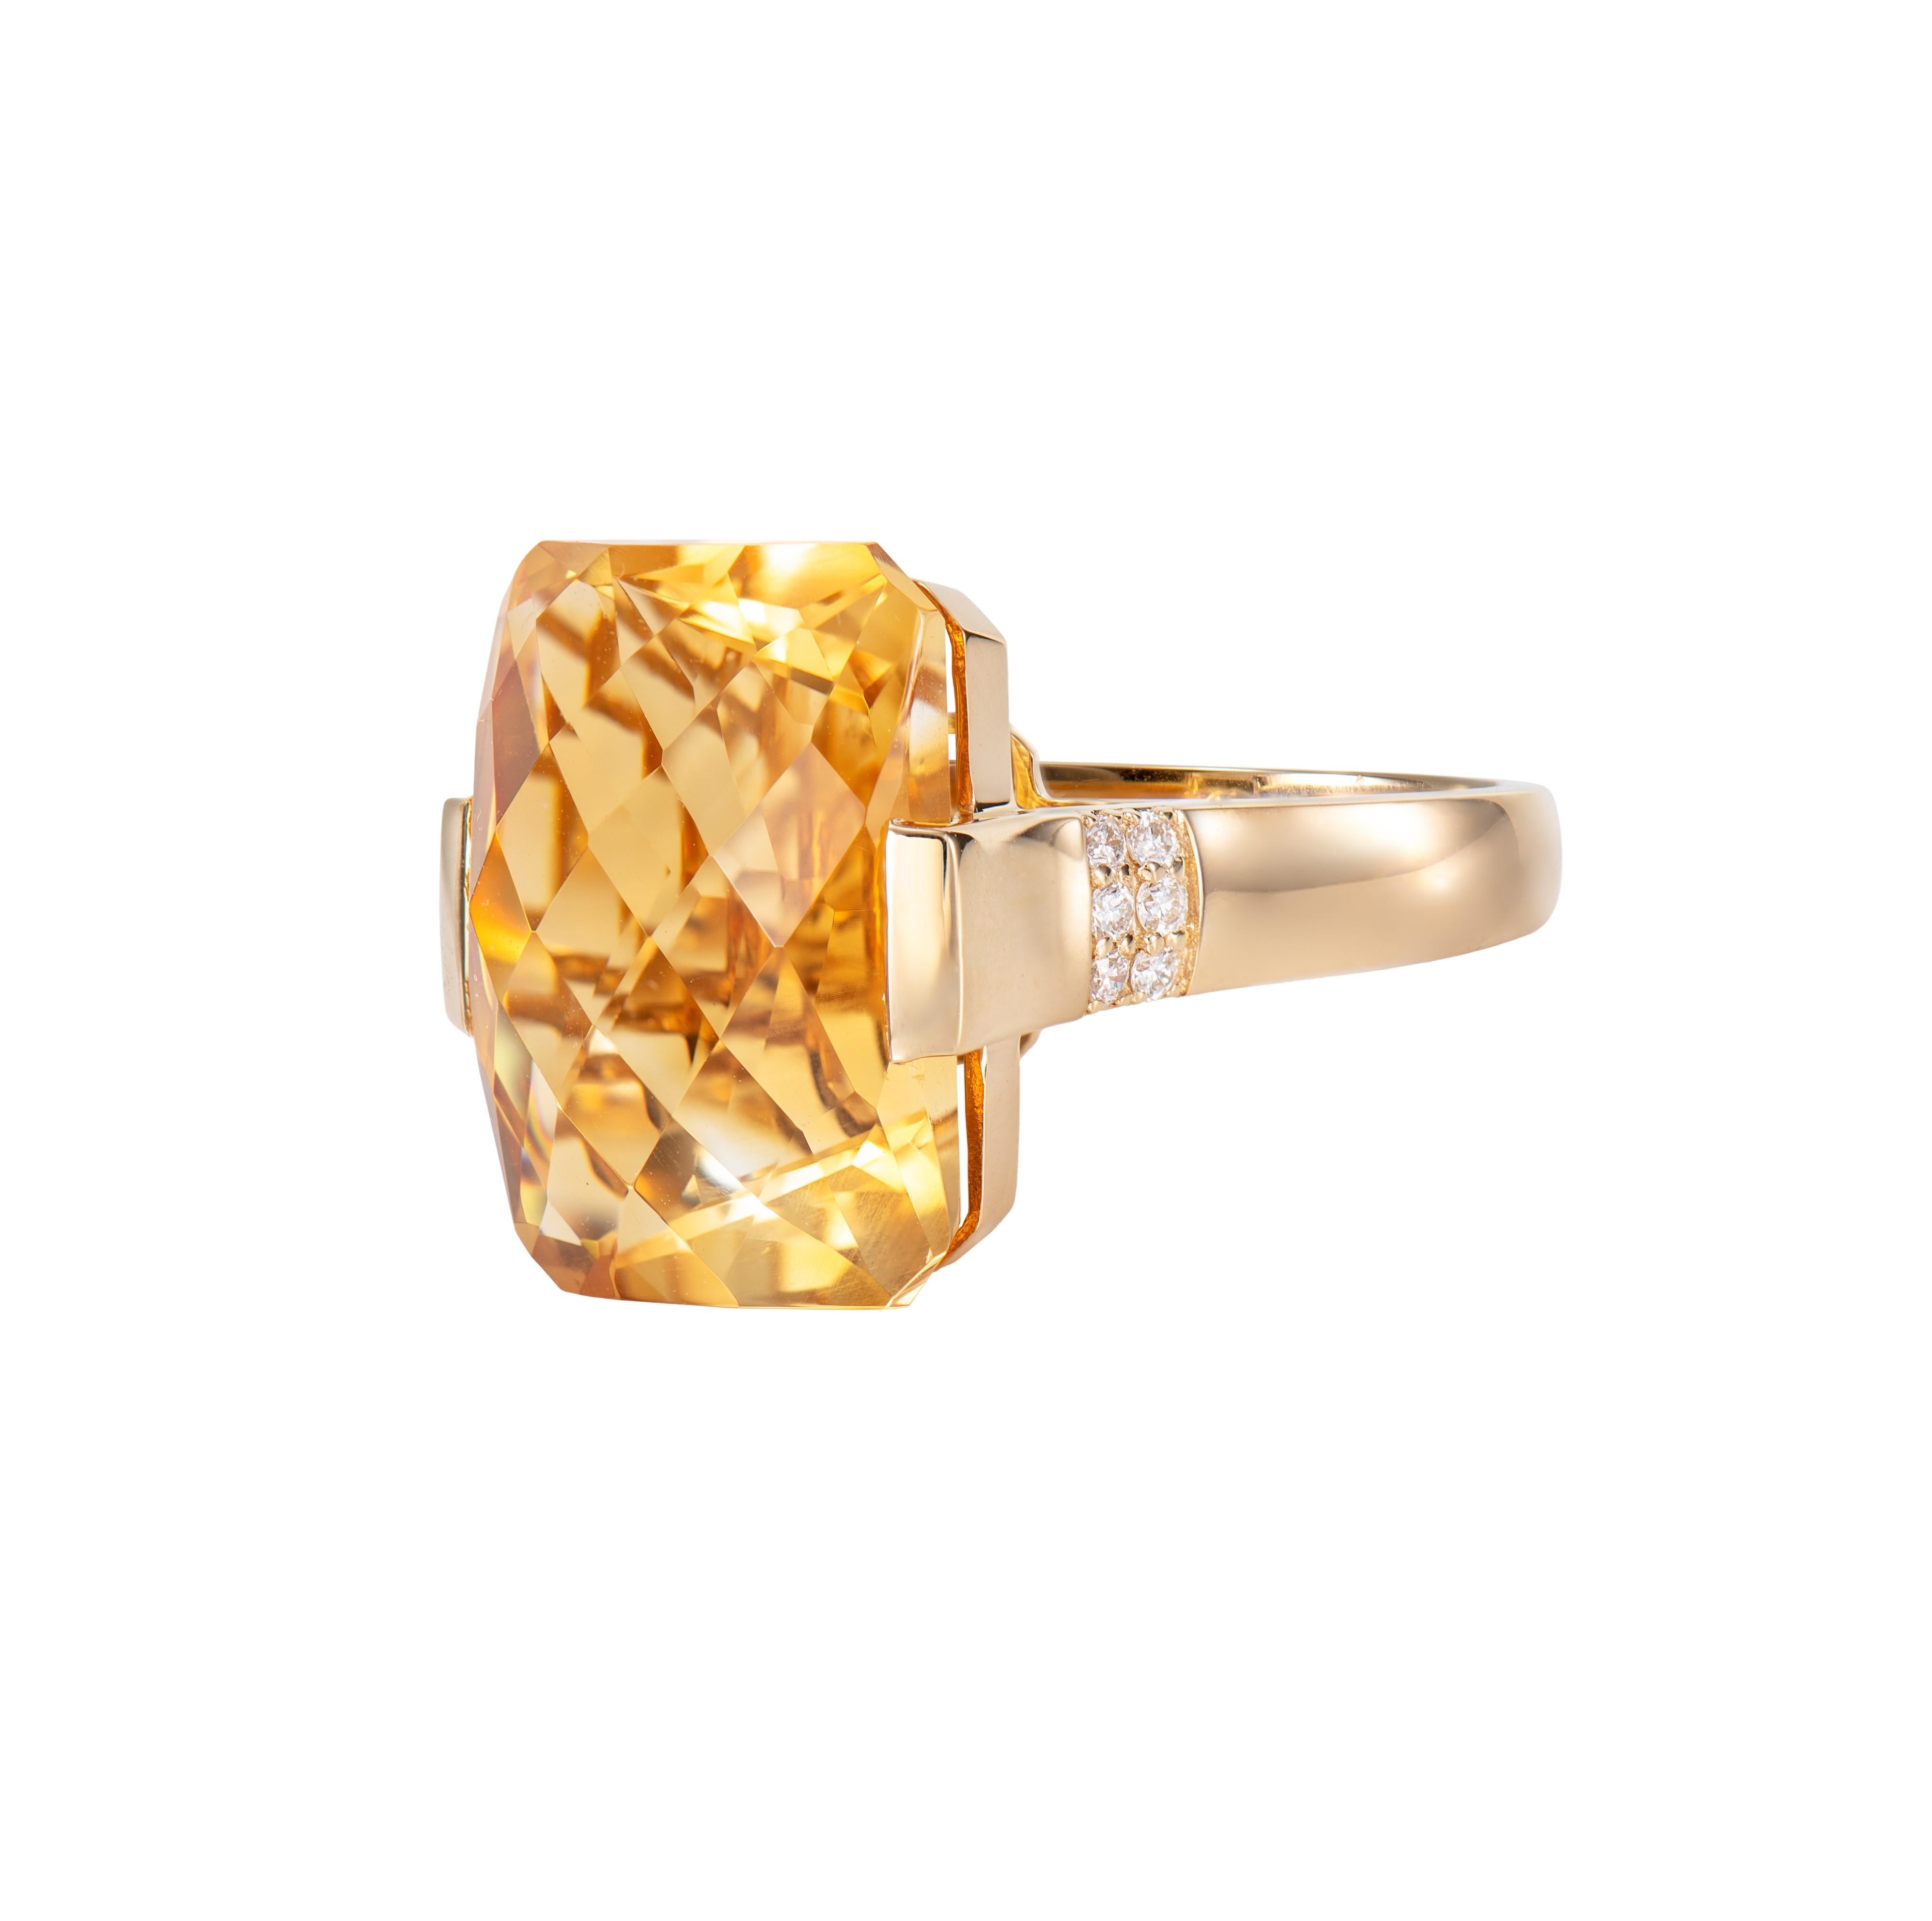 Octagon Cut 18.03 Carat Citrine Fancy Ring in 18Karat Yellow Gold with White Diamond For Sale